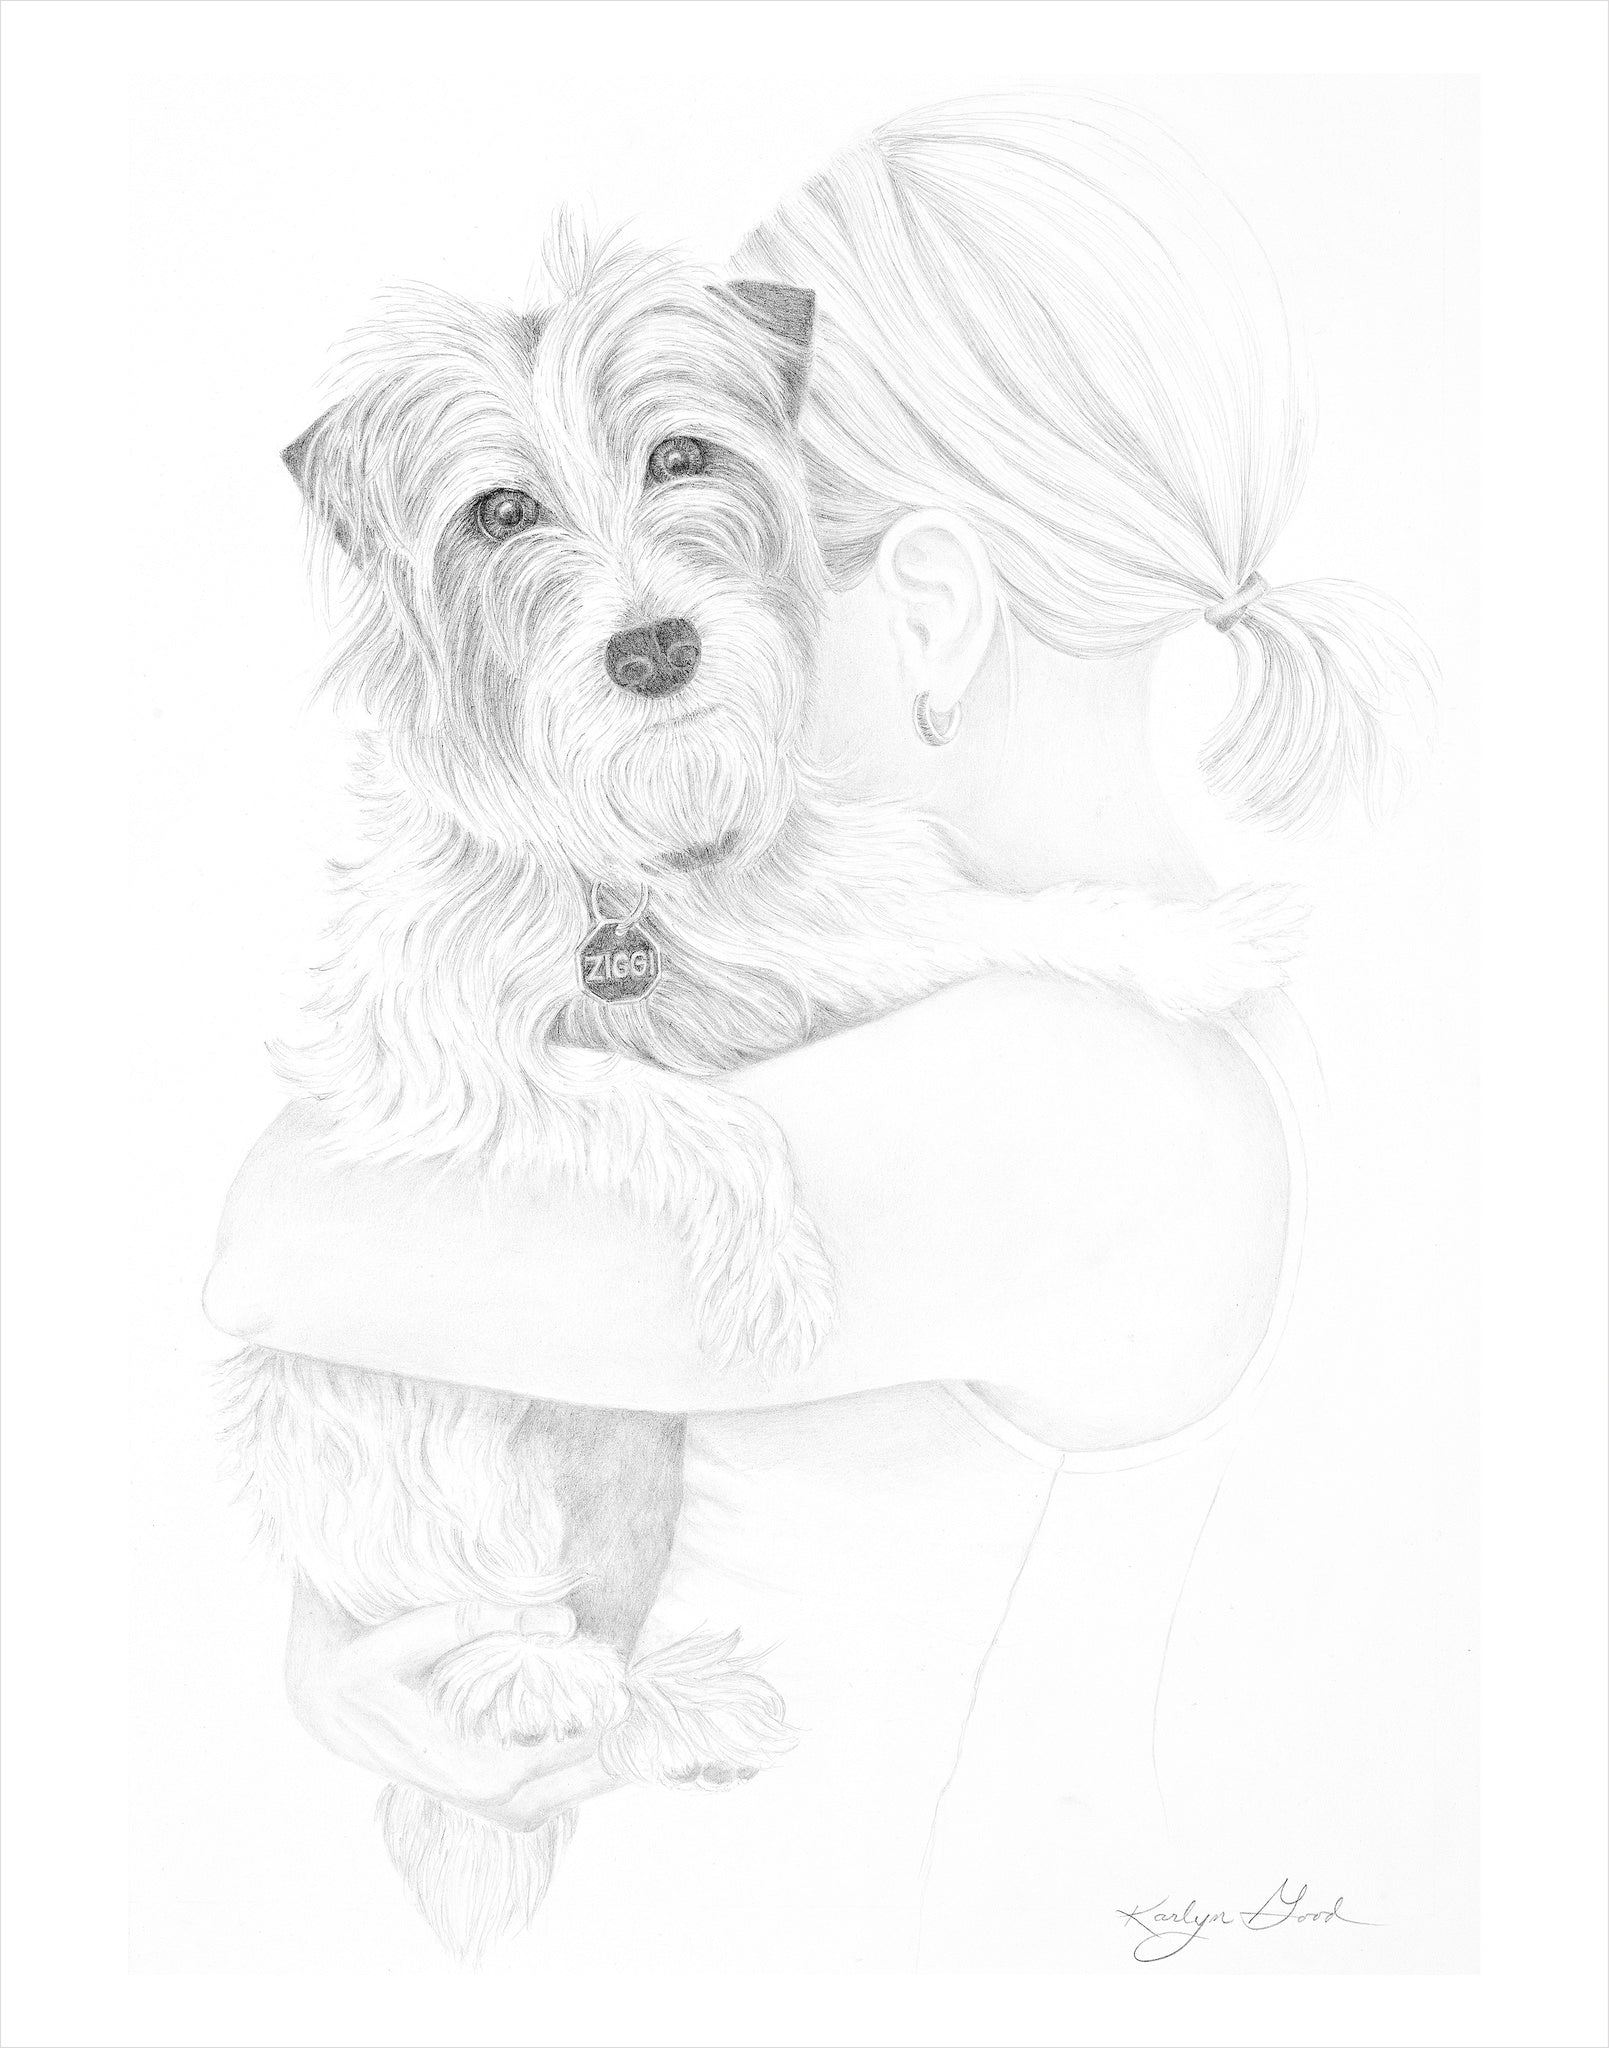 Commission Pet Portrait in B&W (with owner or companion)